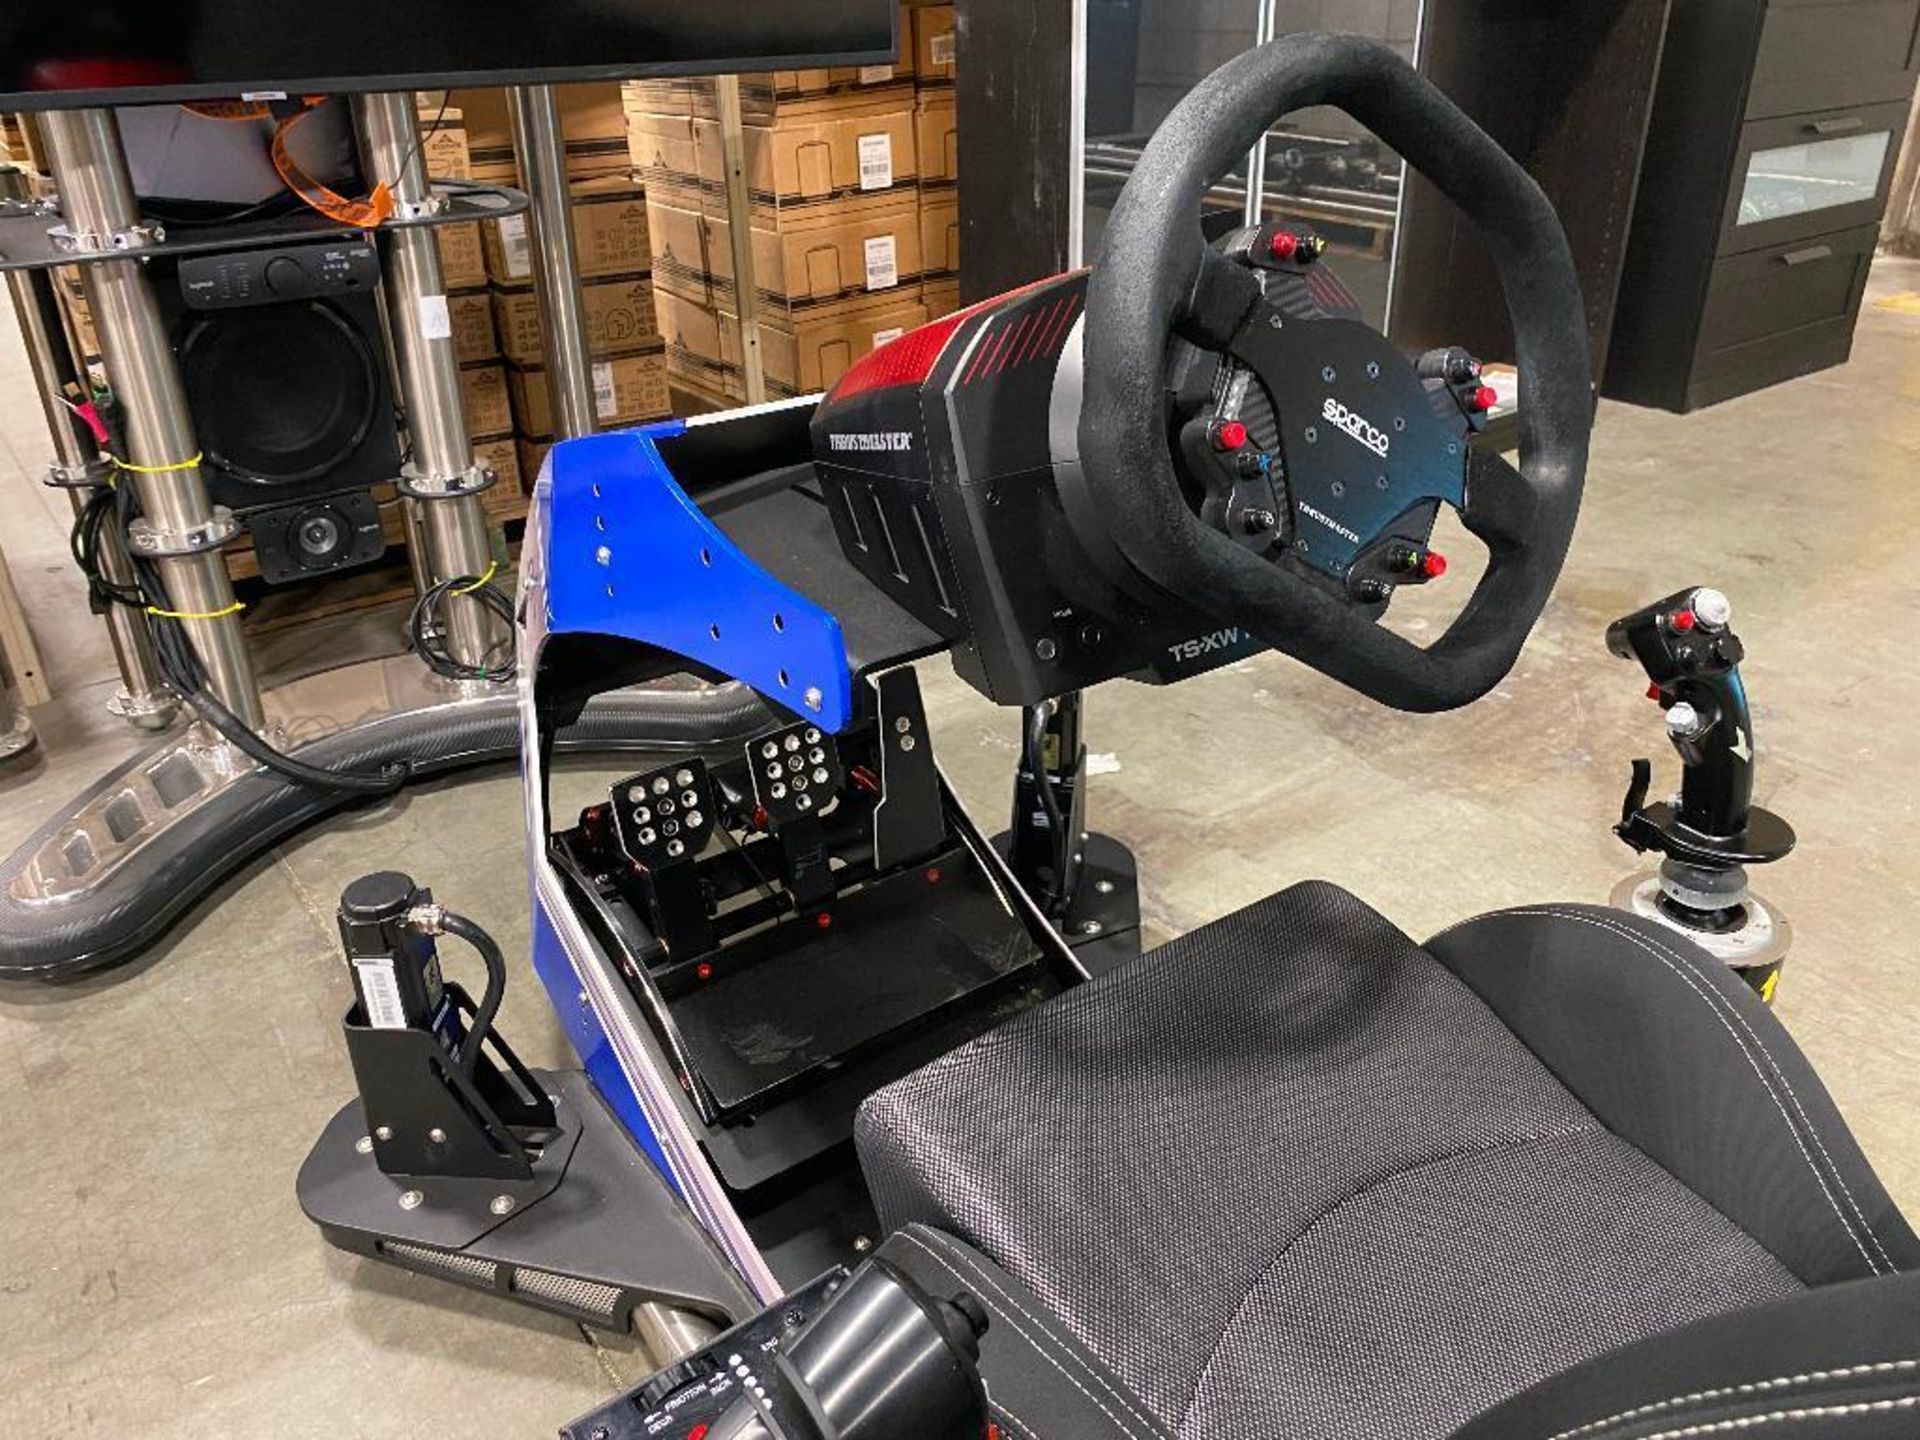 VRX iMotion Thrustmaster Simulator, 5" Motion Actuator - Racing/ Flight, w/ Logitech Dolby Surround - Image 8 of 17